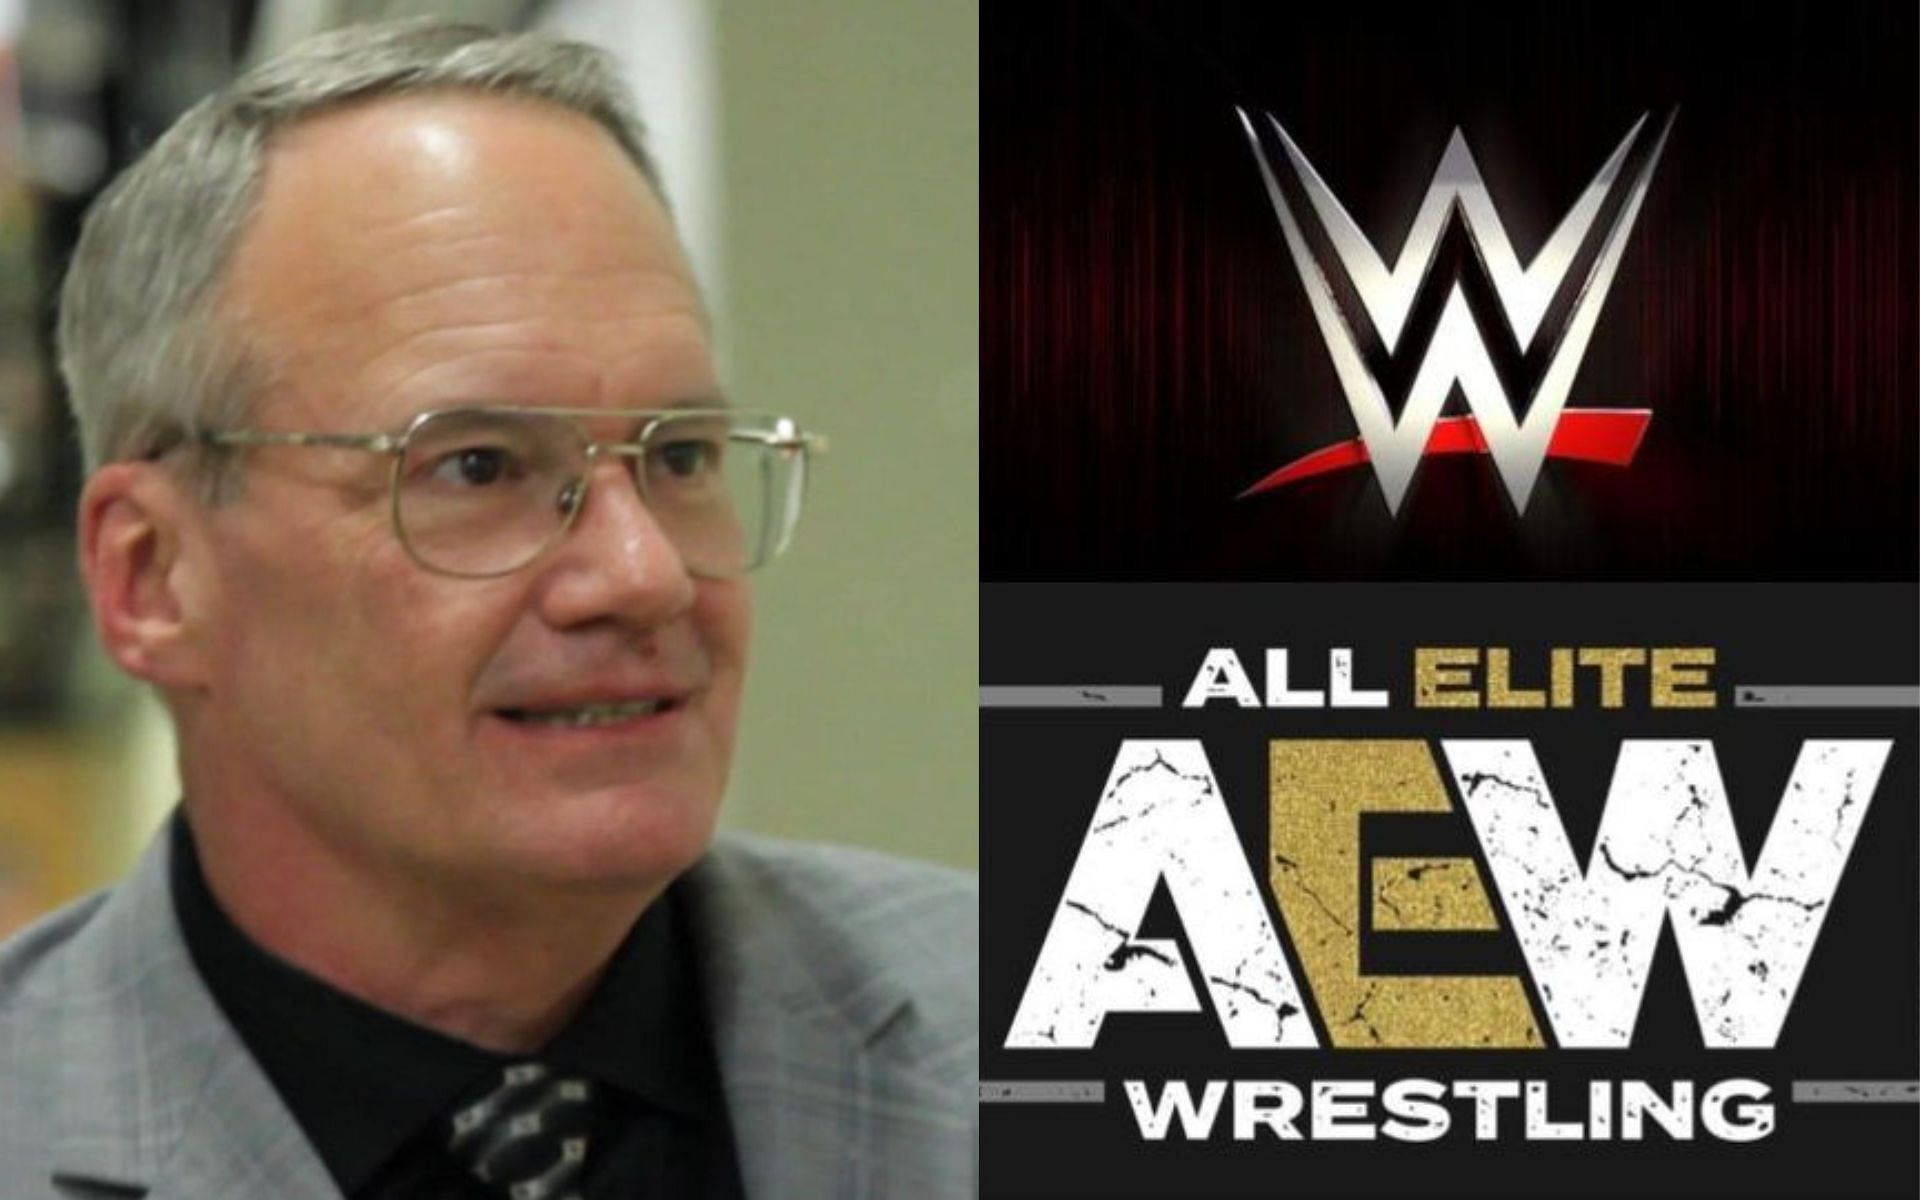 Jim Cornette (left) and WWE and AEW logos (right).